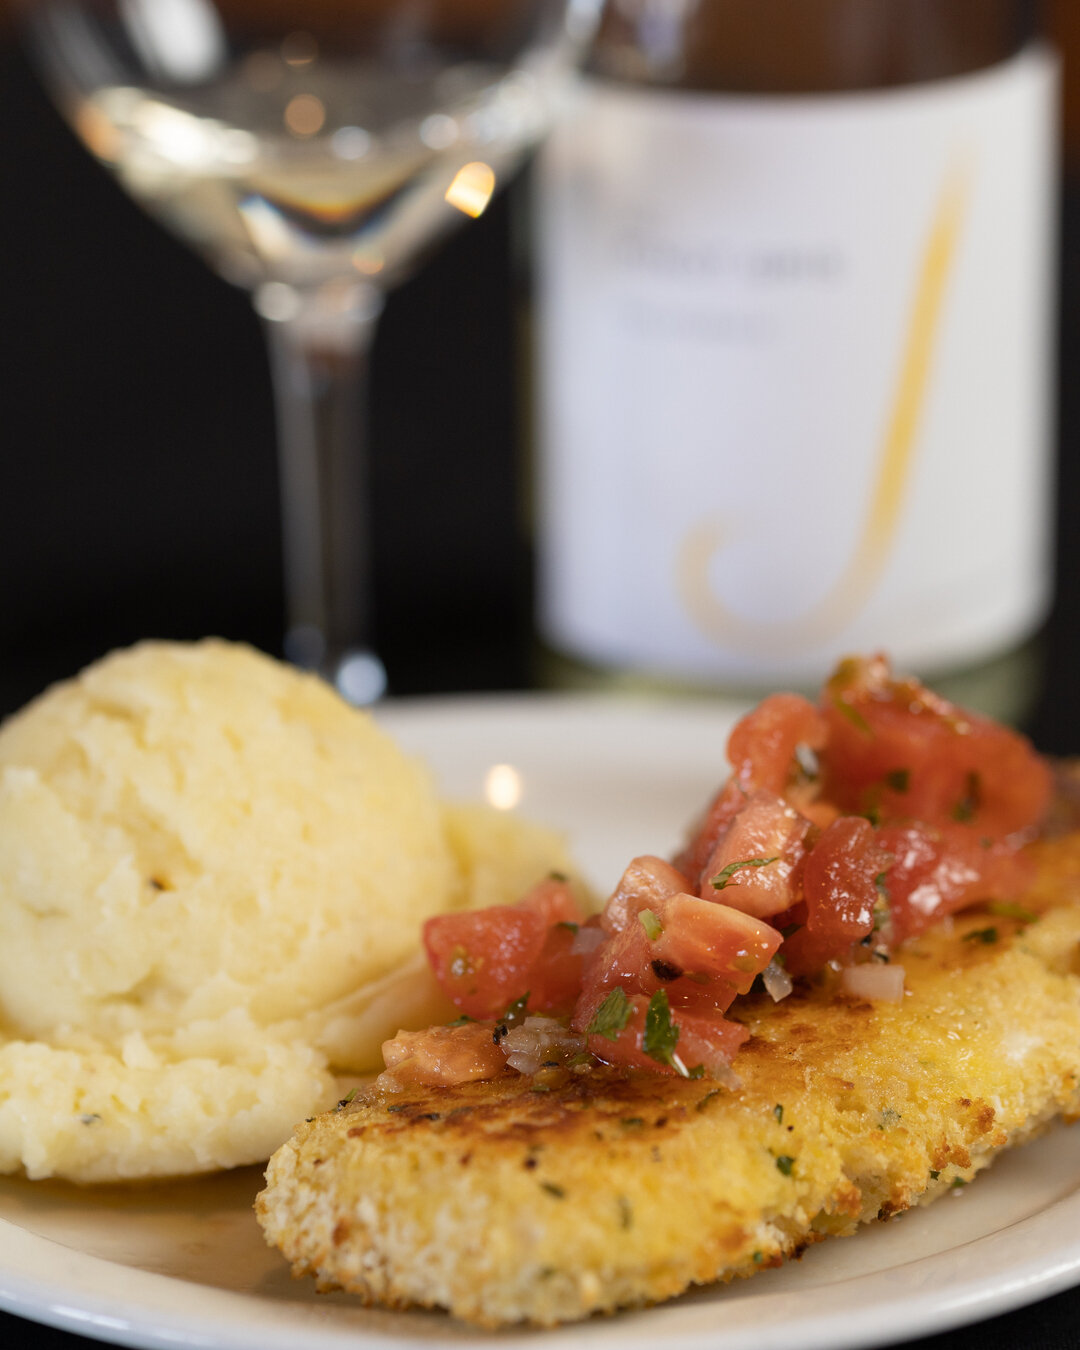 Our Vineyard #Halibut, a Halibut coated with breadcrumbs and served with a tomato &amp; white wine vinaigrette on top. ​​​​​​​​
​​​​​​​​
Reservations at CarversUtah.com​​​​​​​​
#seafood #takeout #dinein #carvers #sandy #Ut #eatlocal #steaksandseafood